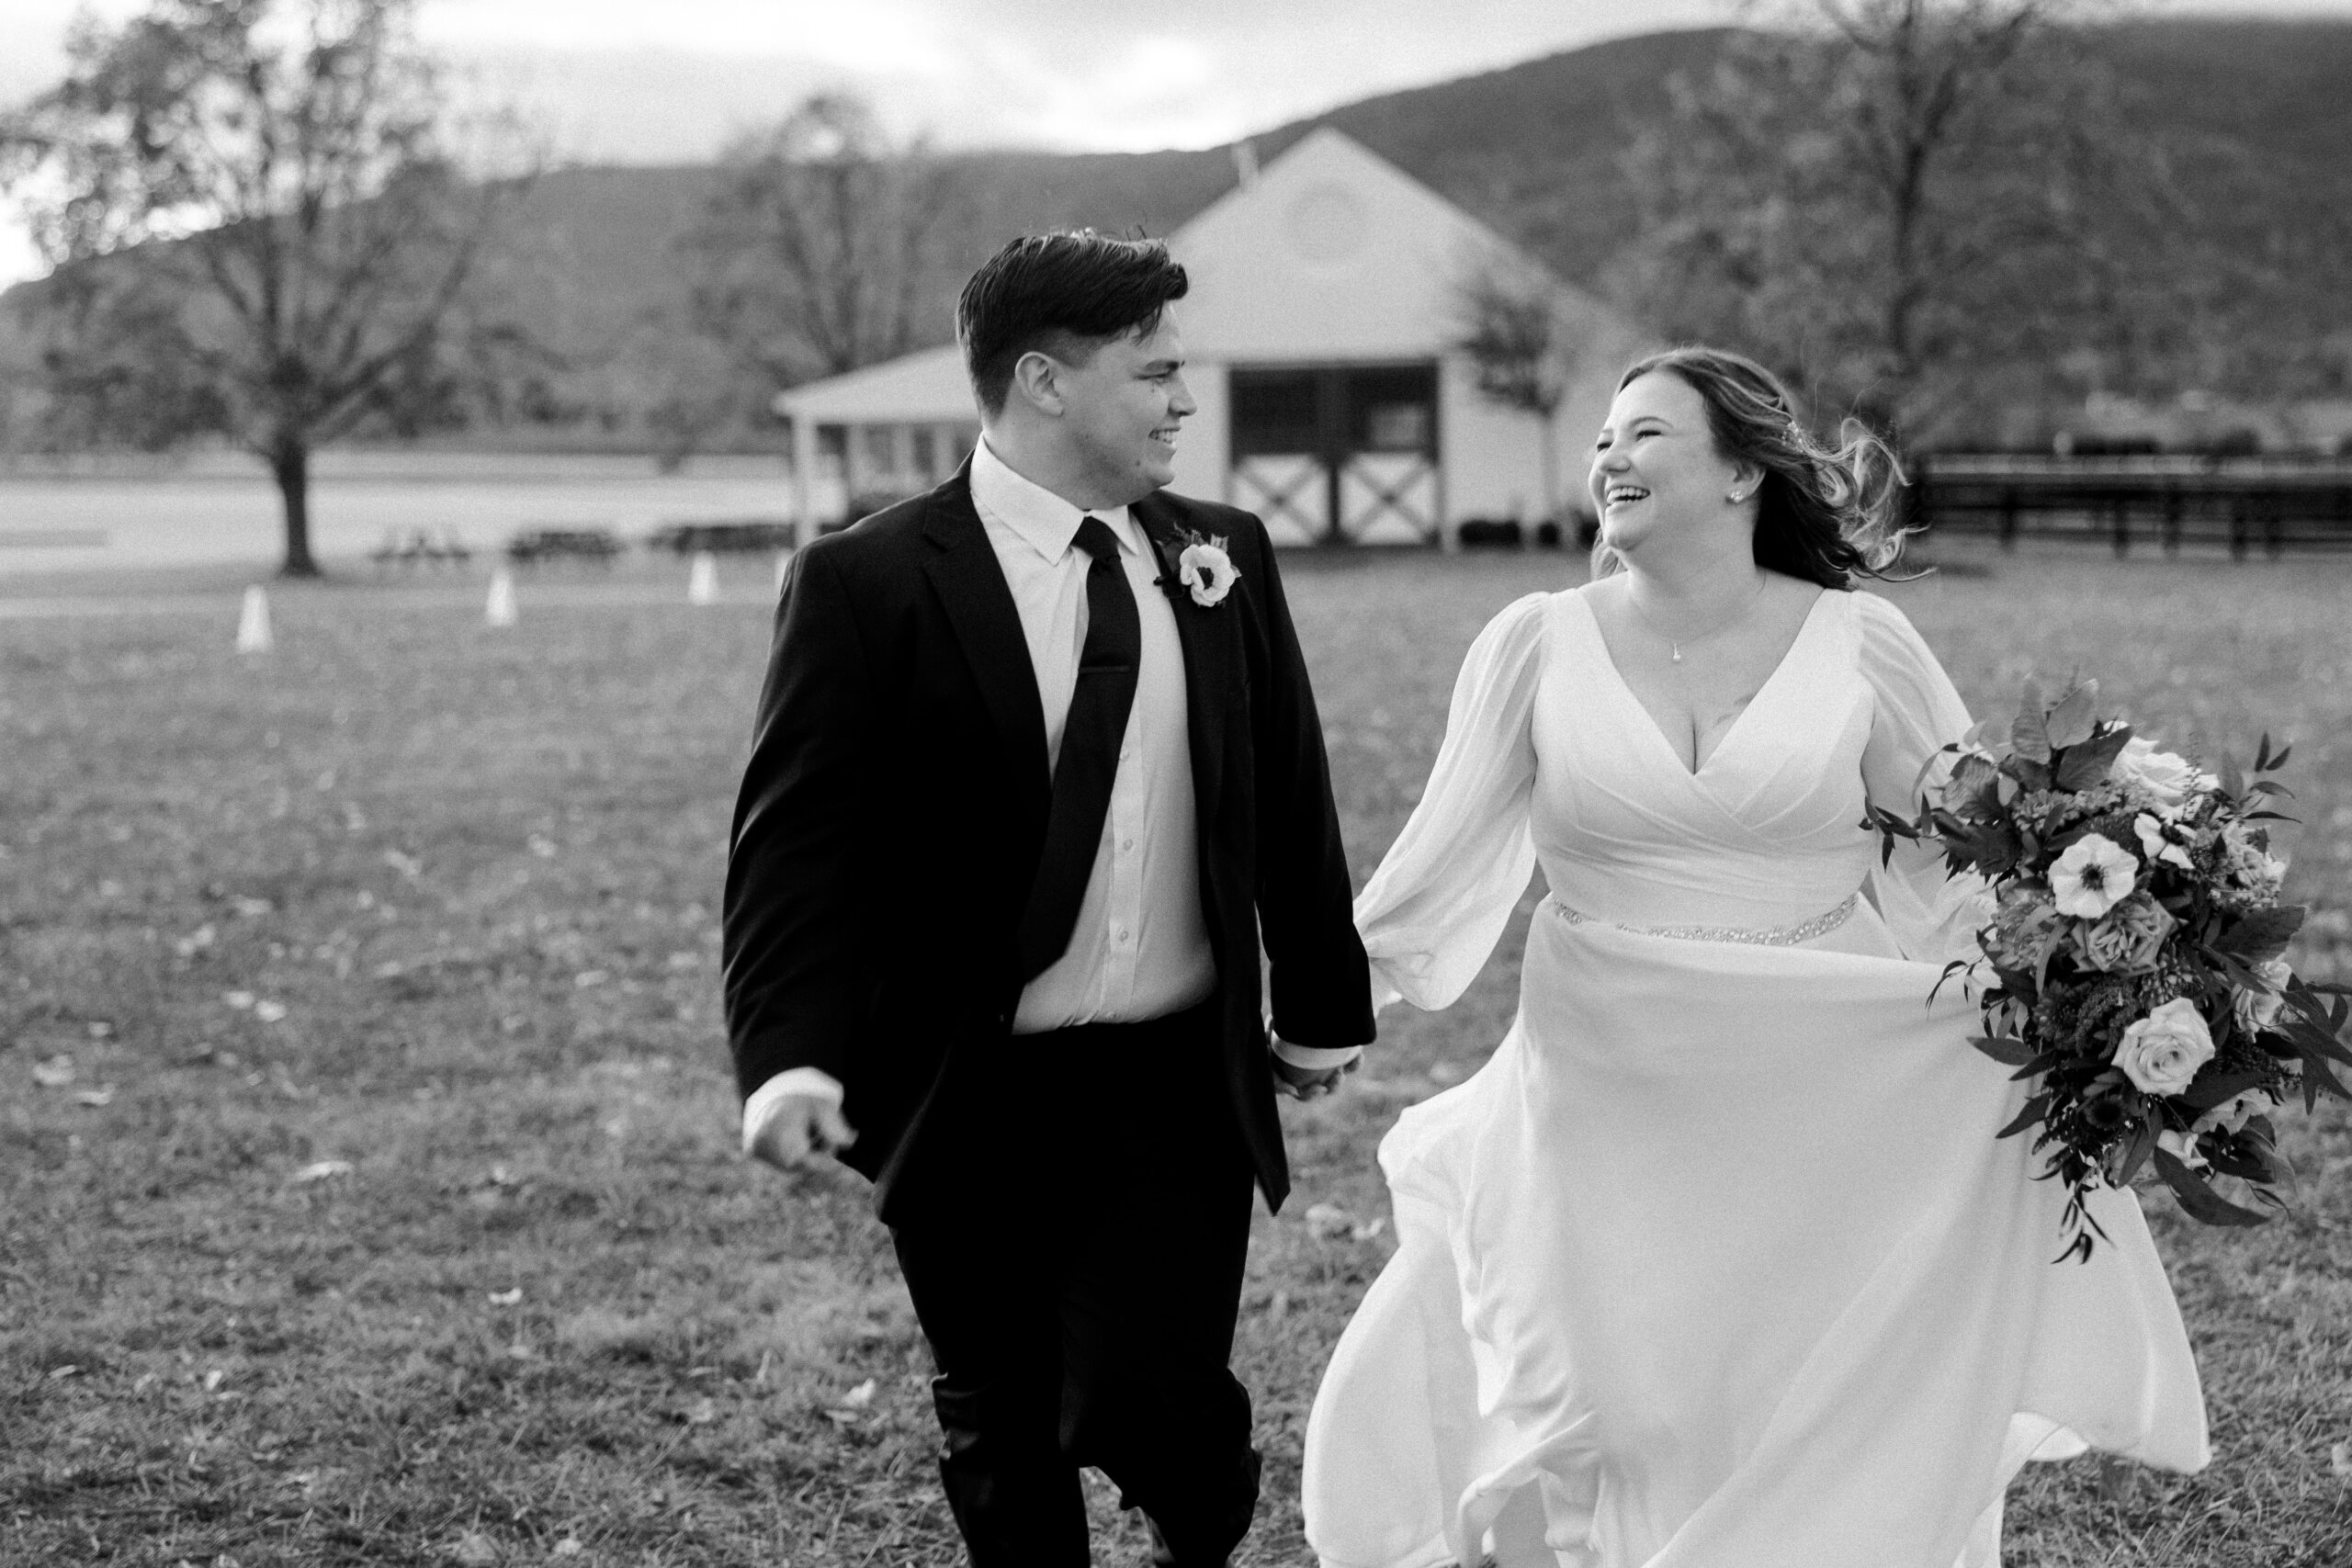 The couple runs towards the camera in a beautiful emotional moment during their King Family Vineyards wedding.